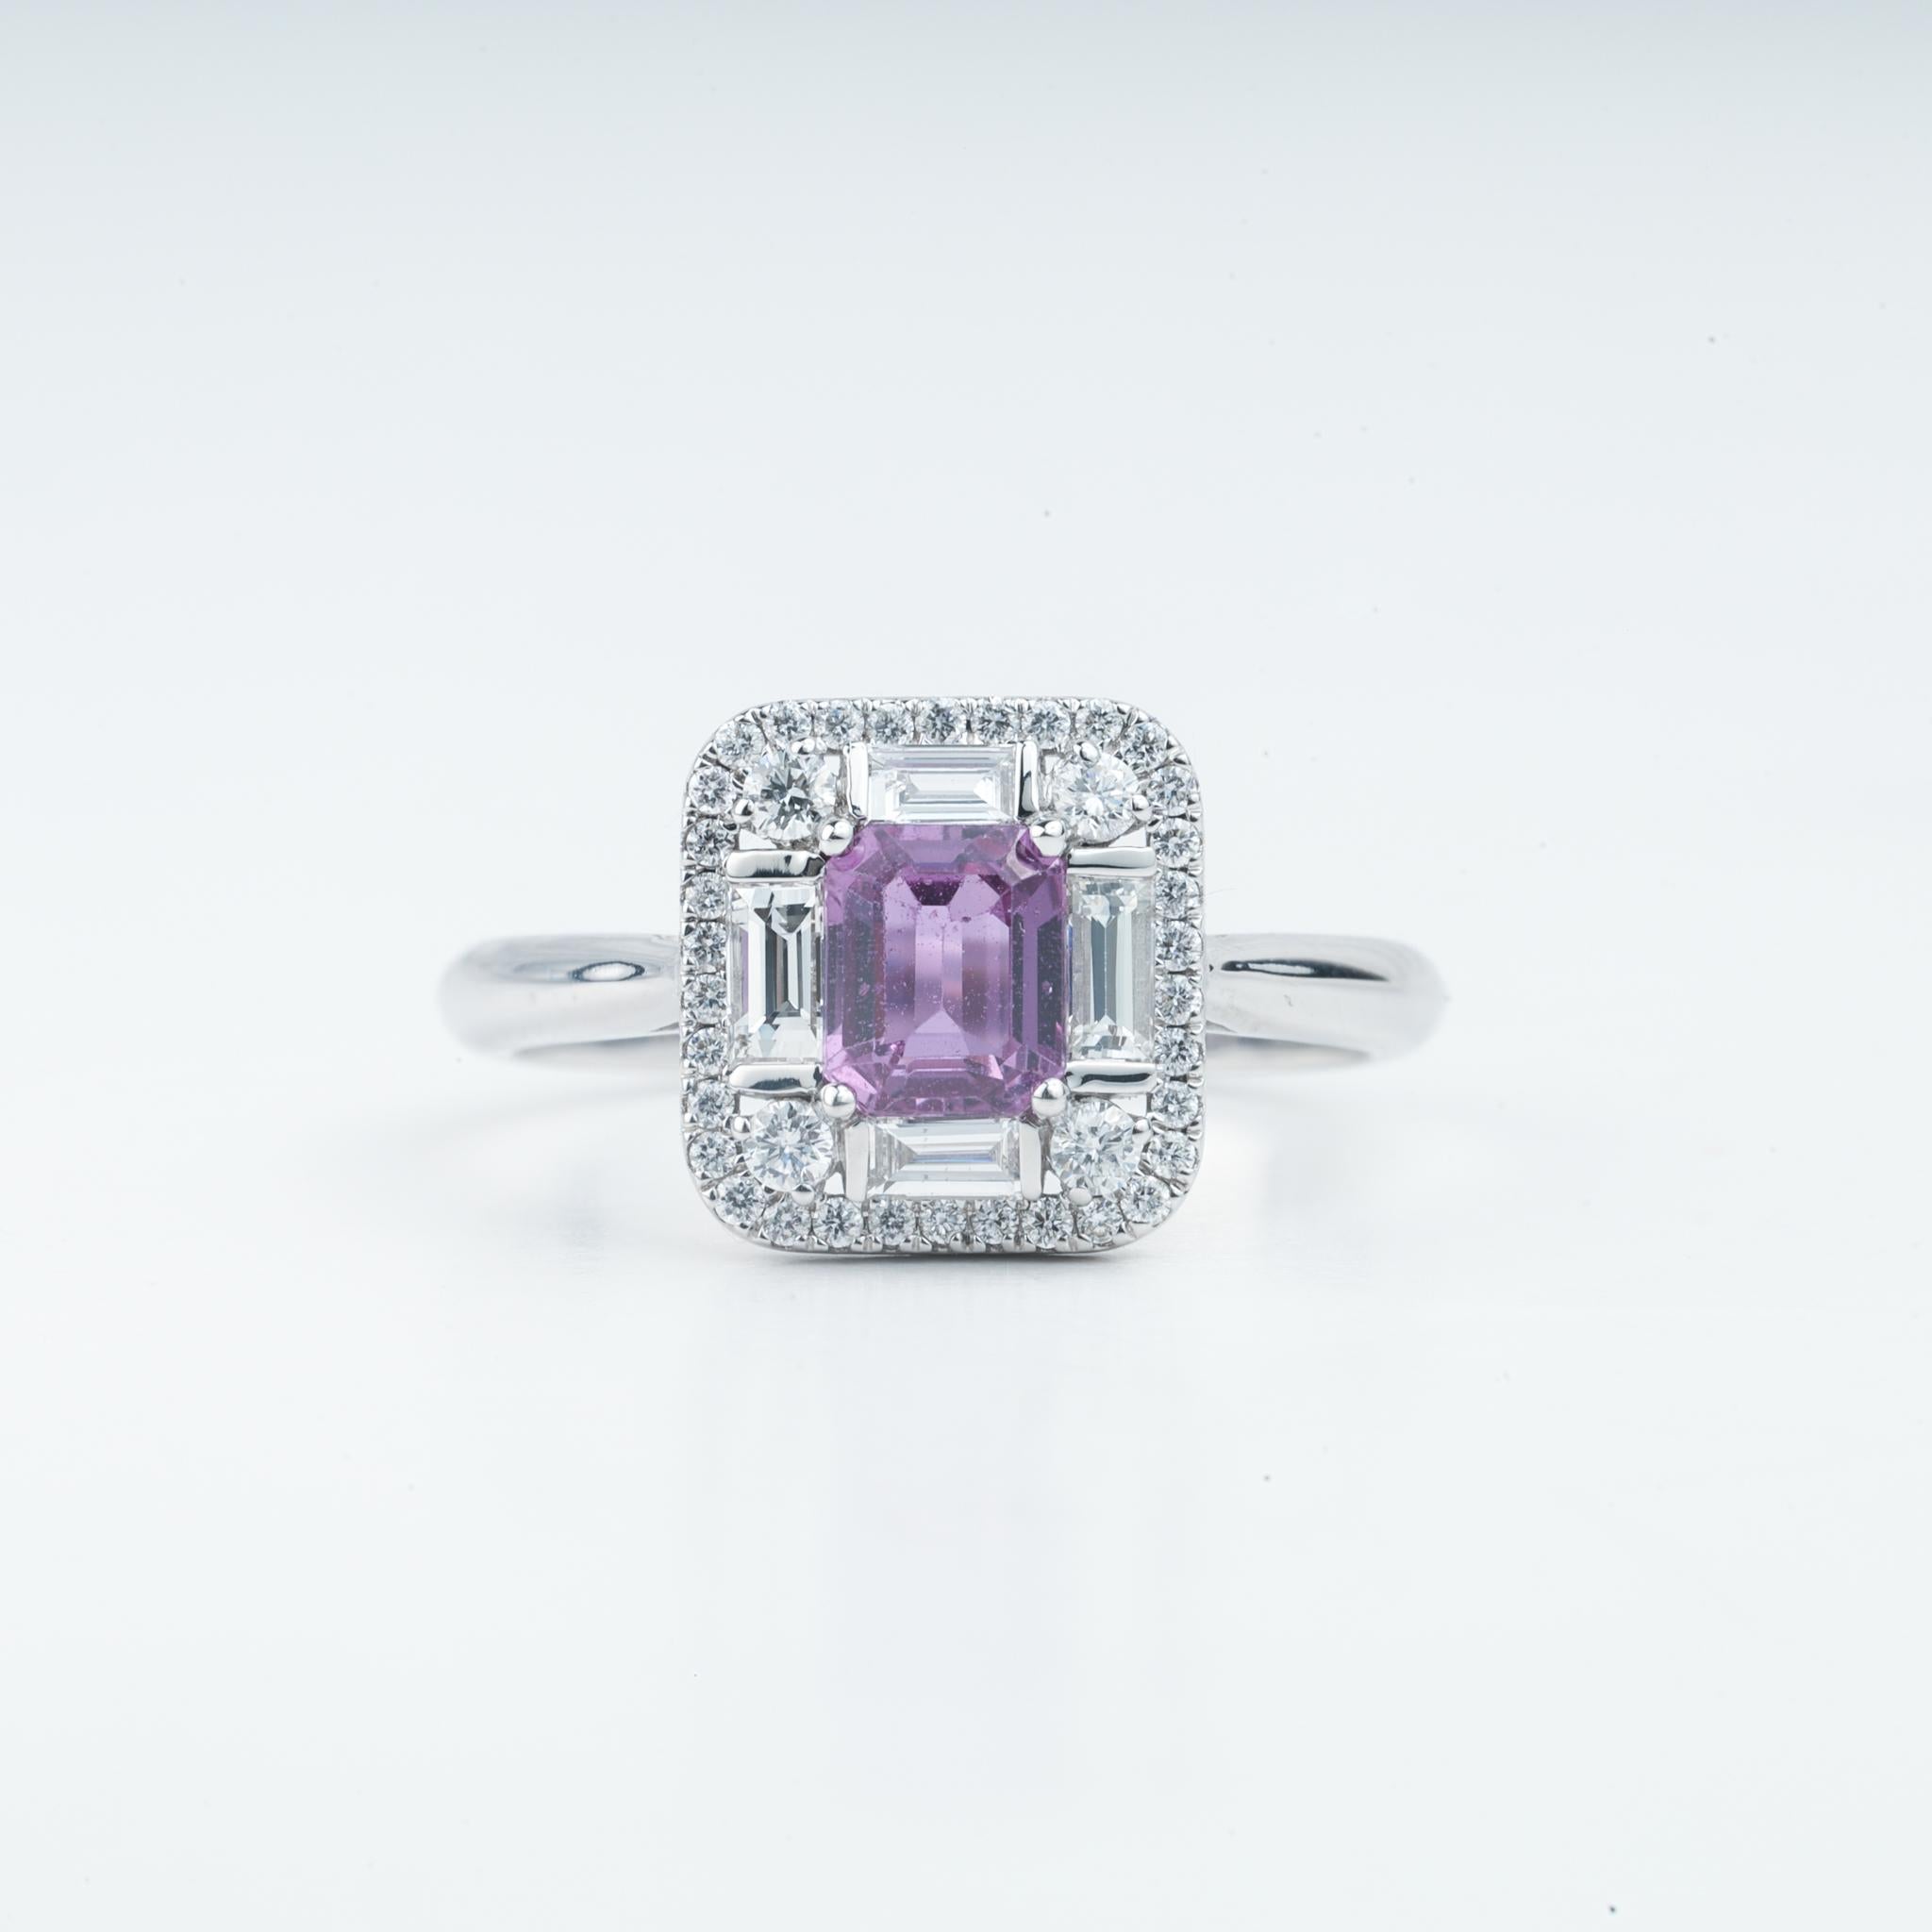 1 Carat Pink Sapphire Diamond Cocktail Engagement Ring in 18k White Gold

Available in 18k white gold.

Same design can be made also with other custom gemstones per request.

Product details:

- Solid gold (18k) 4 grams

- approx. 1.1 carat CT